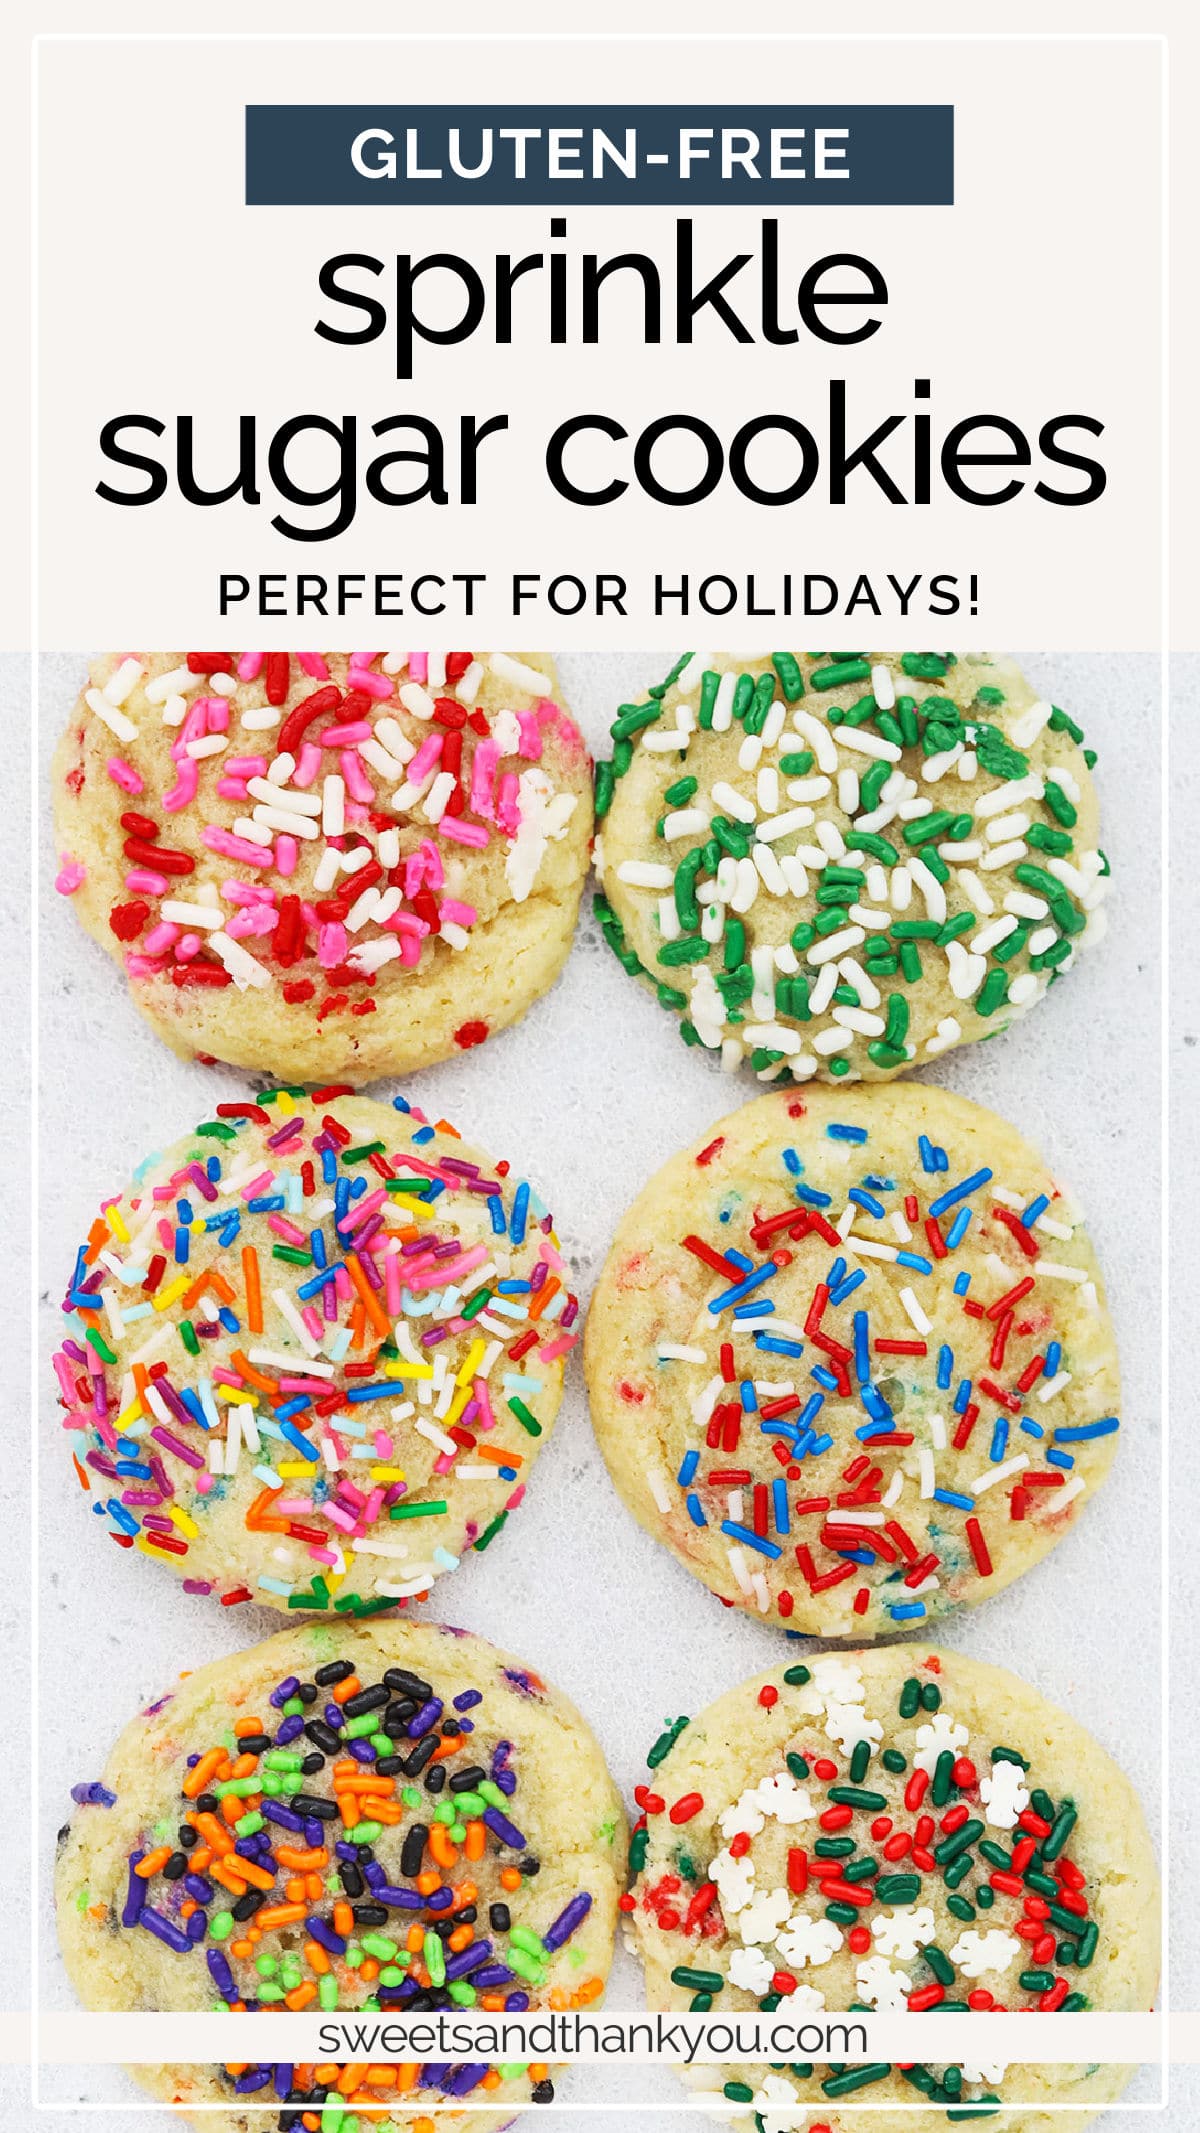 Gluten-Free Sprinkle Sugar Cookies - Soft gluten-free sugar cookies with sprinkles are so cute! They're perfect for celebrating holidays, birthdays, and special occasions. // Gluten-Free Sprinkle Cookies // Gluten-Free Funfetti Cookies // Gluten-Free Confetti Cookies // Gluten-Free Holiday Sprinkle Cookies // Holiday Sprinkle Sugar Cookies #glutenfree #cookies #sprinkles #sugarcookies #funfetti #sprinklecookies #holidaycookies